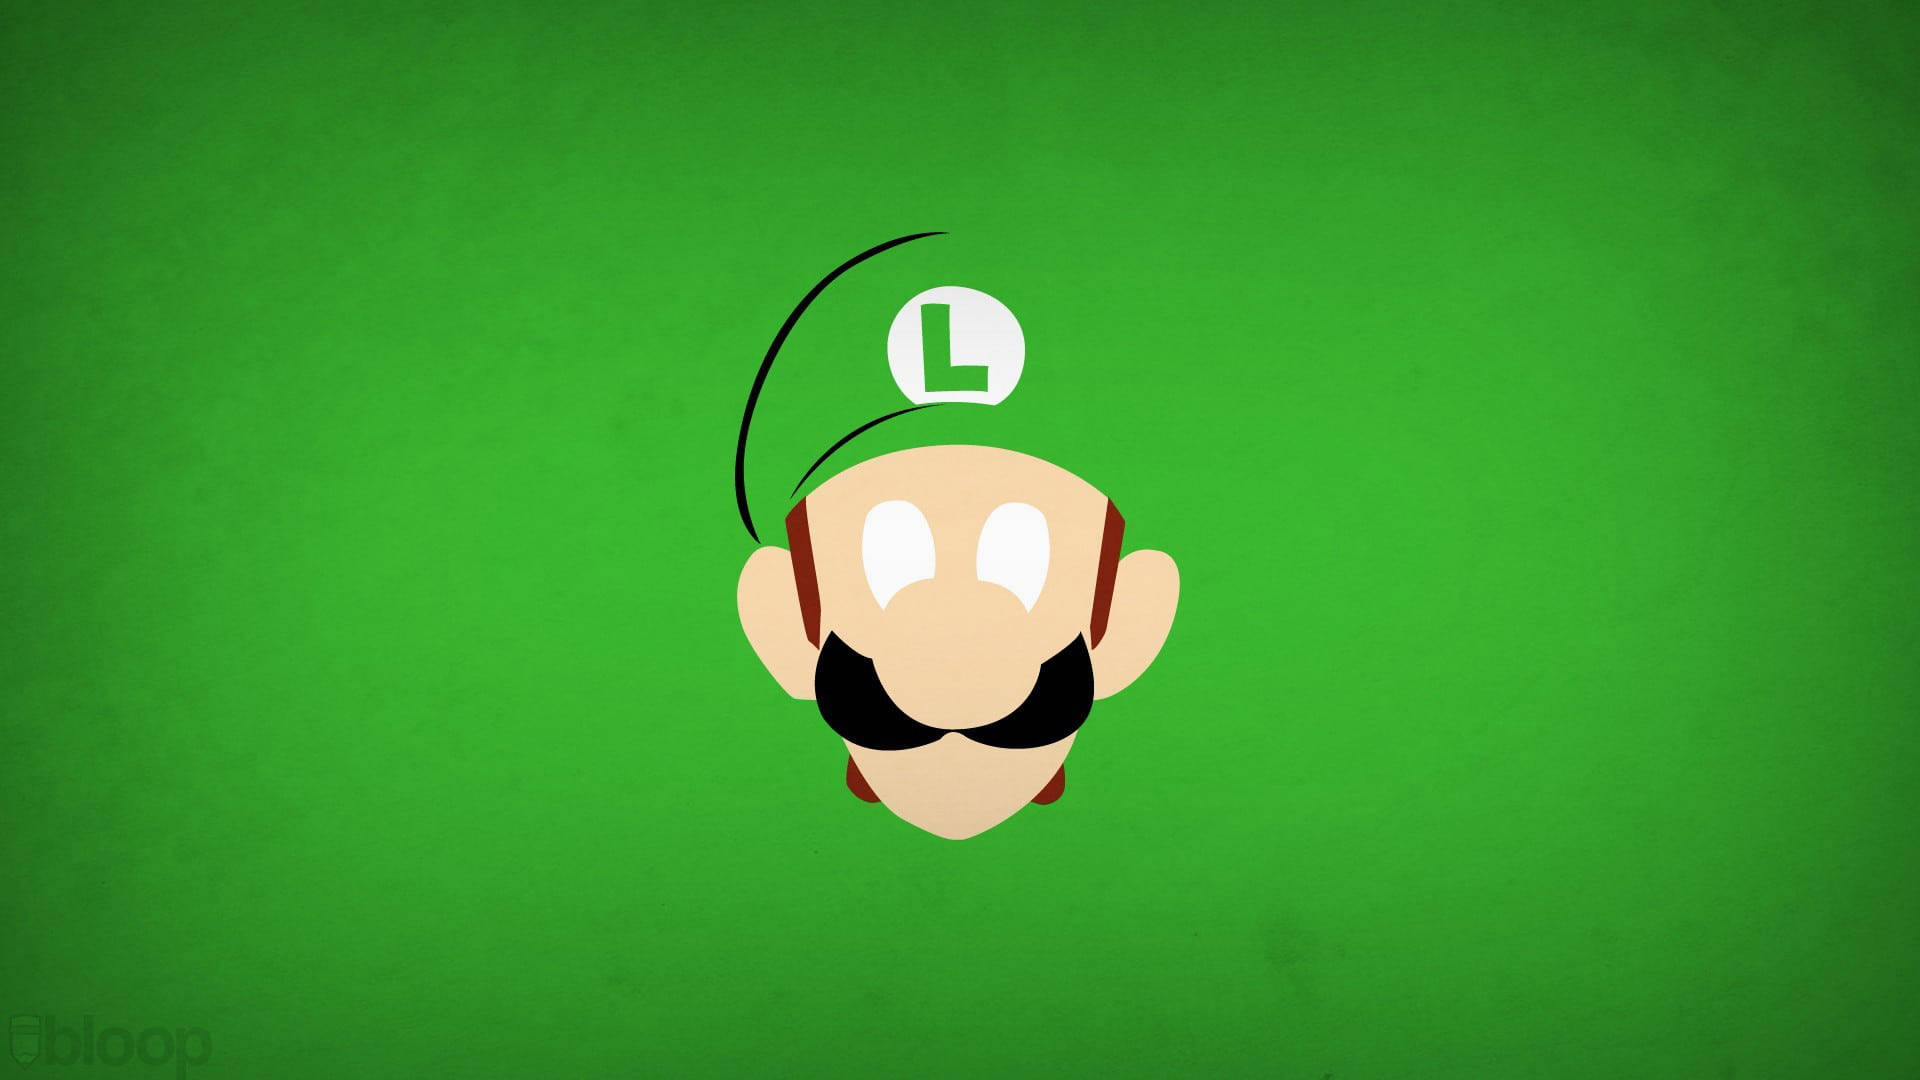 Cool Green Super Mario Background